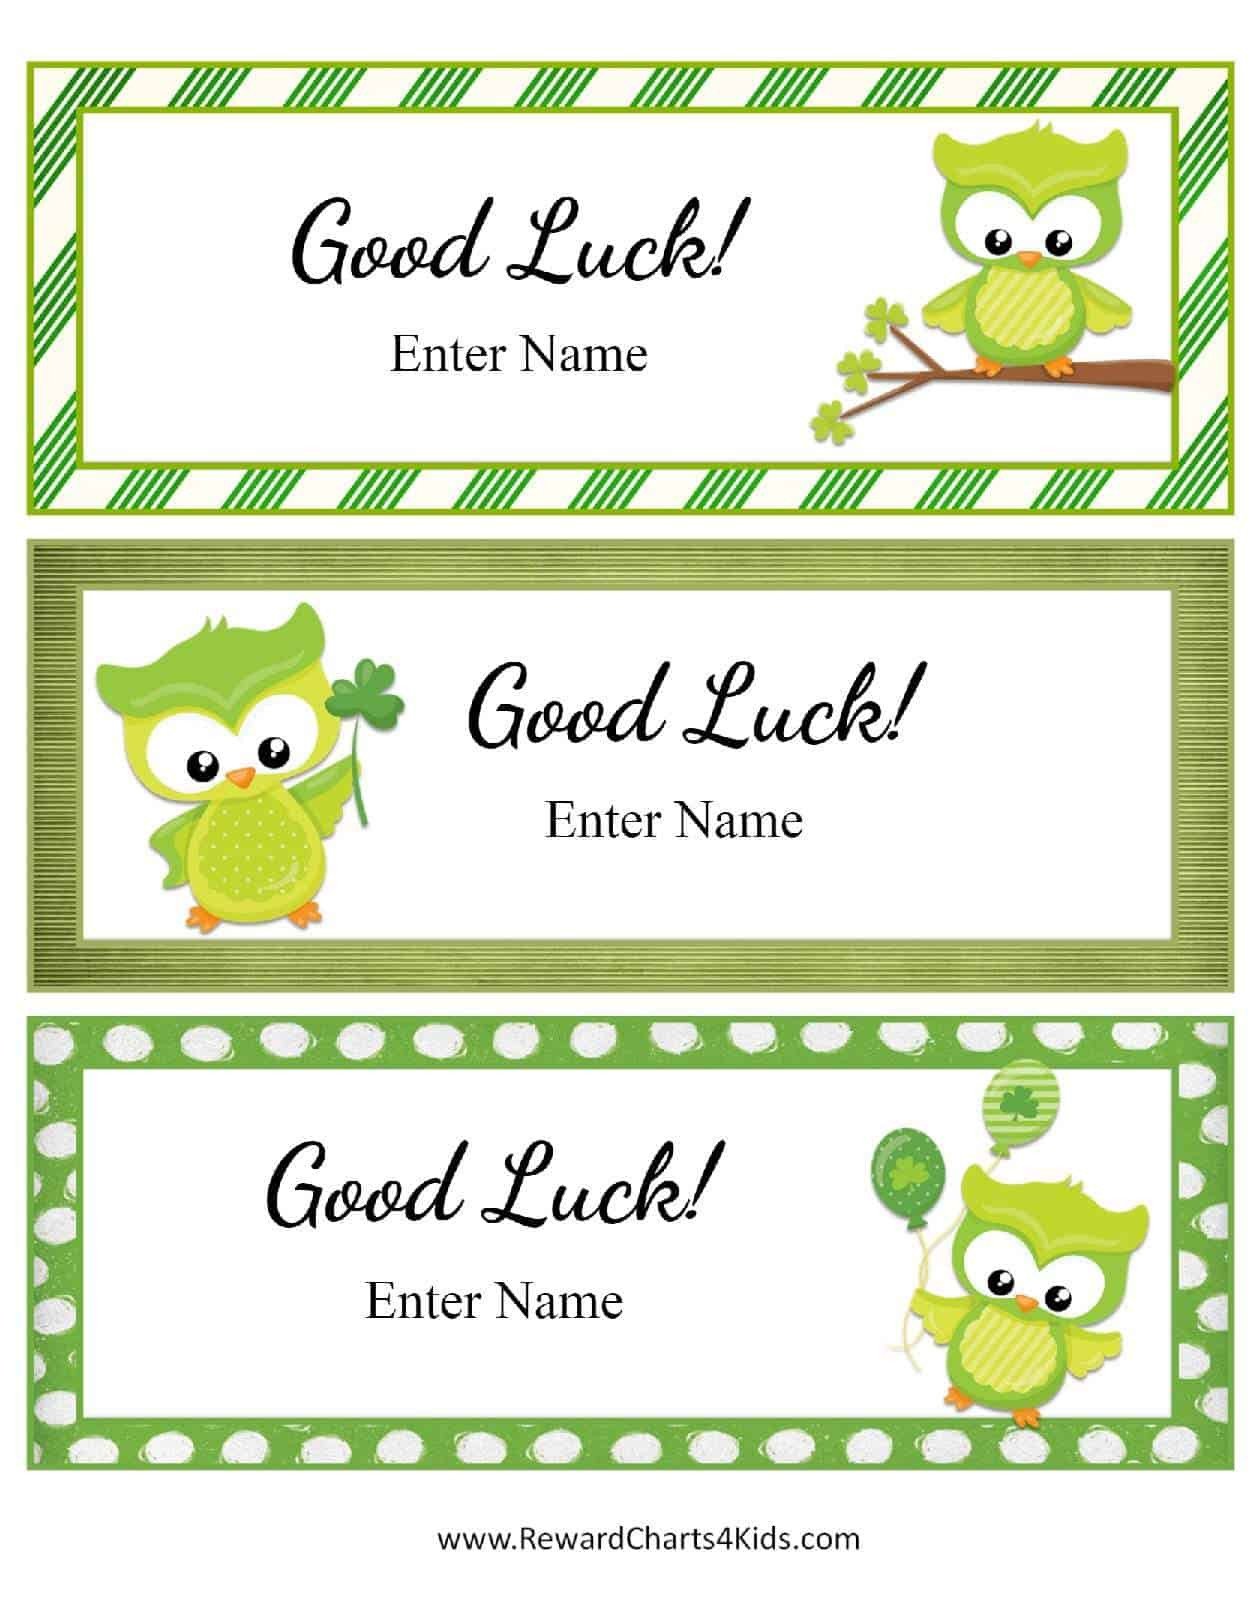 Free Good Luck Cards for Kids